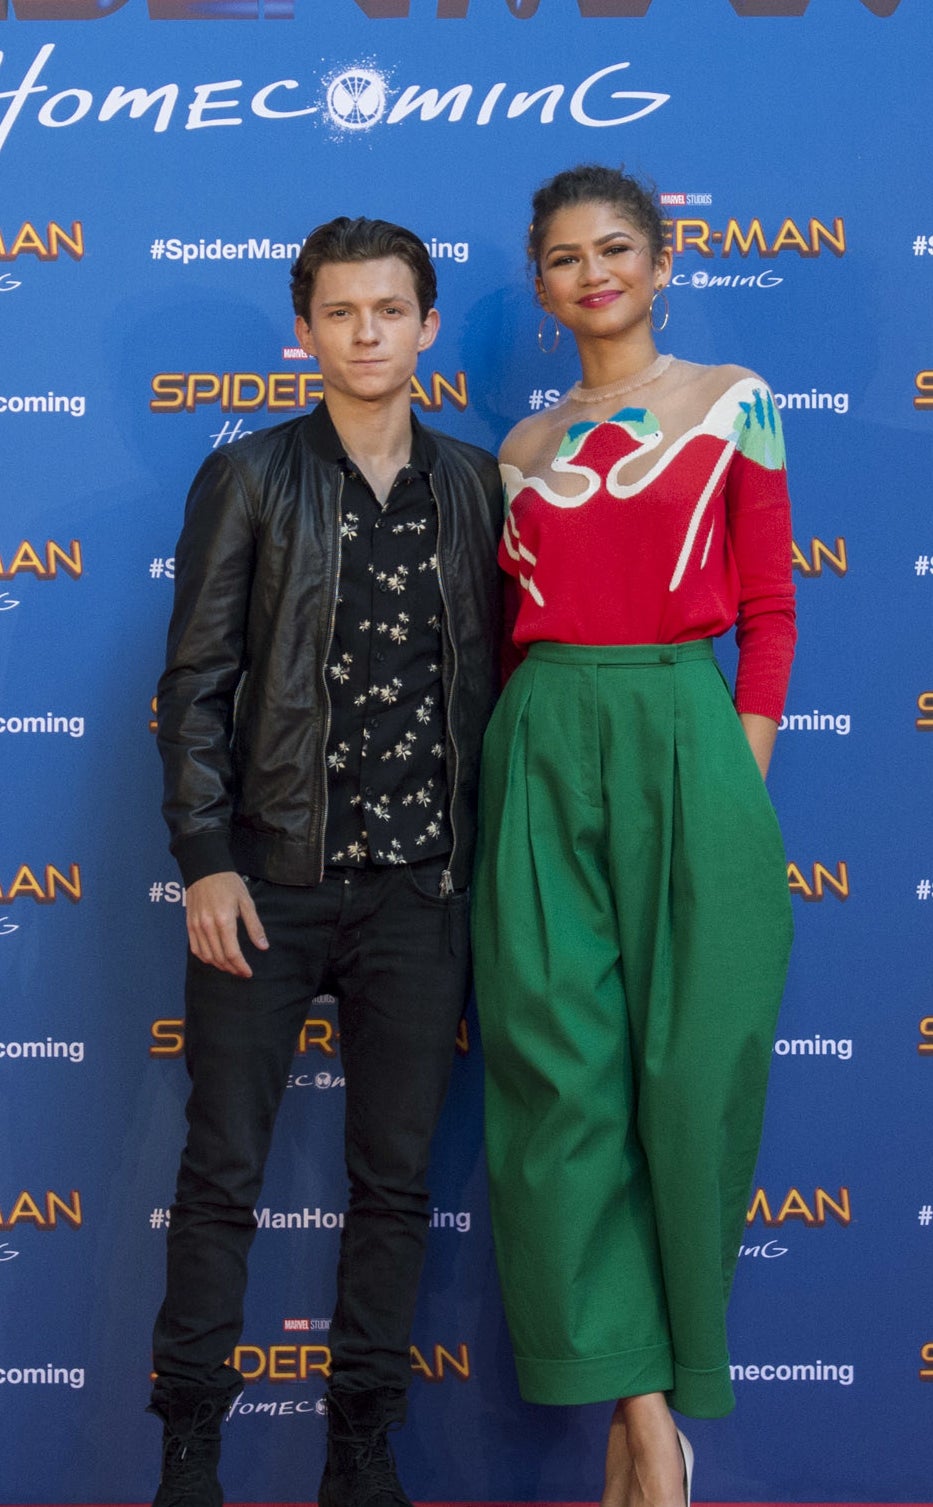 Zendaya and Tom Holland on a red carpet